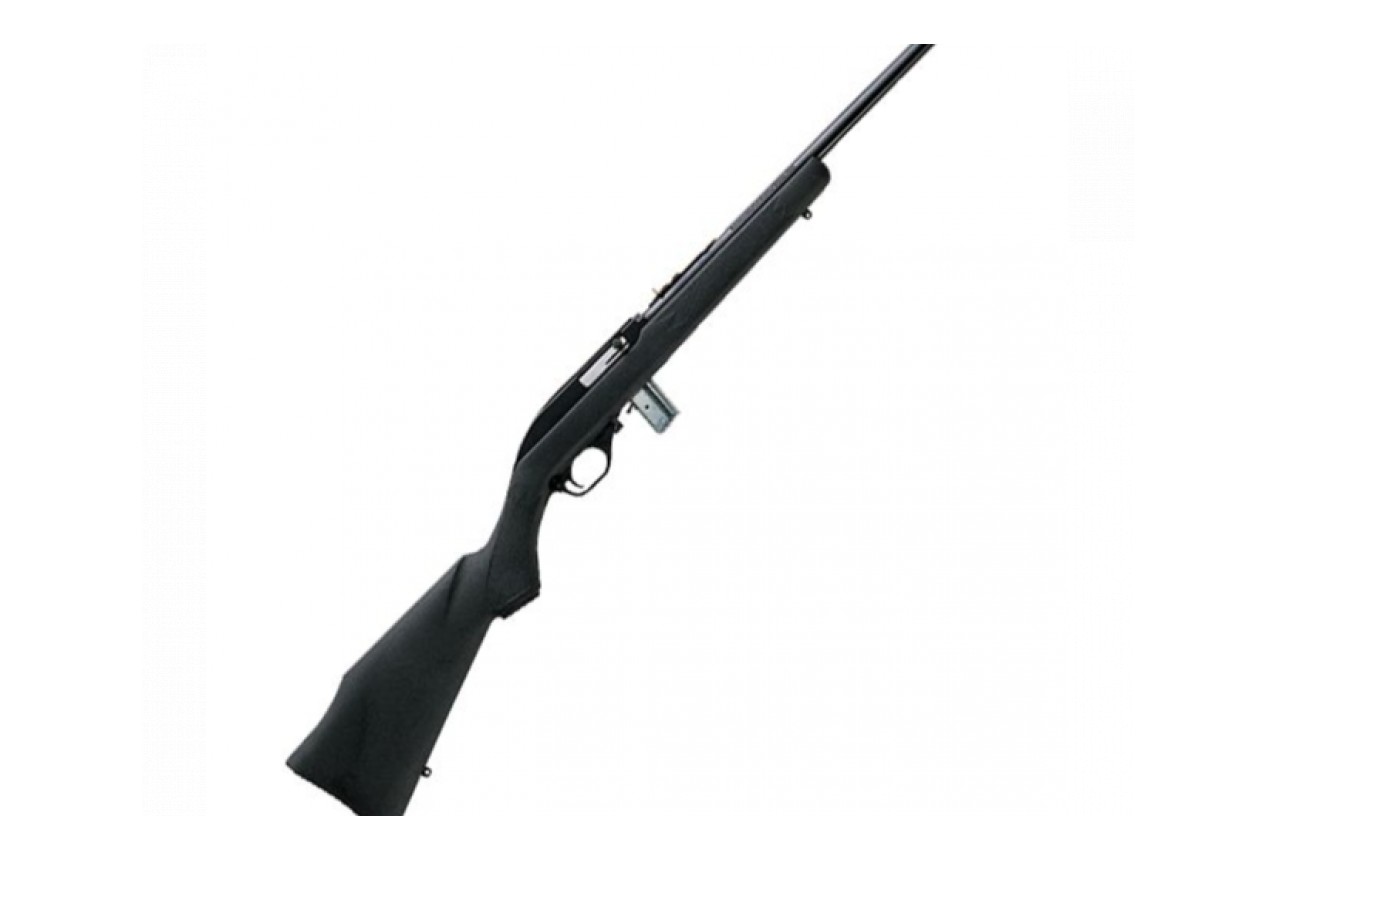 The length of the barrel is eighteen inches and comes in either a blued-black finish or stainless steel on the 70 PSS “Takedown” version of the gun. 